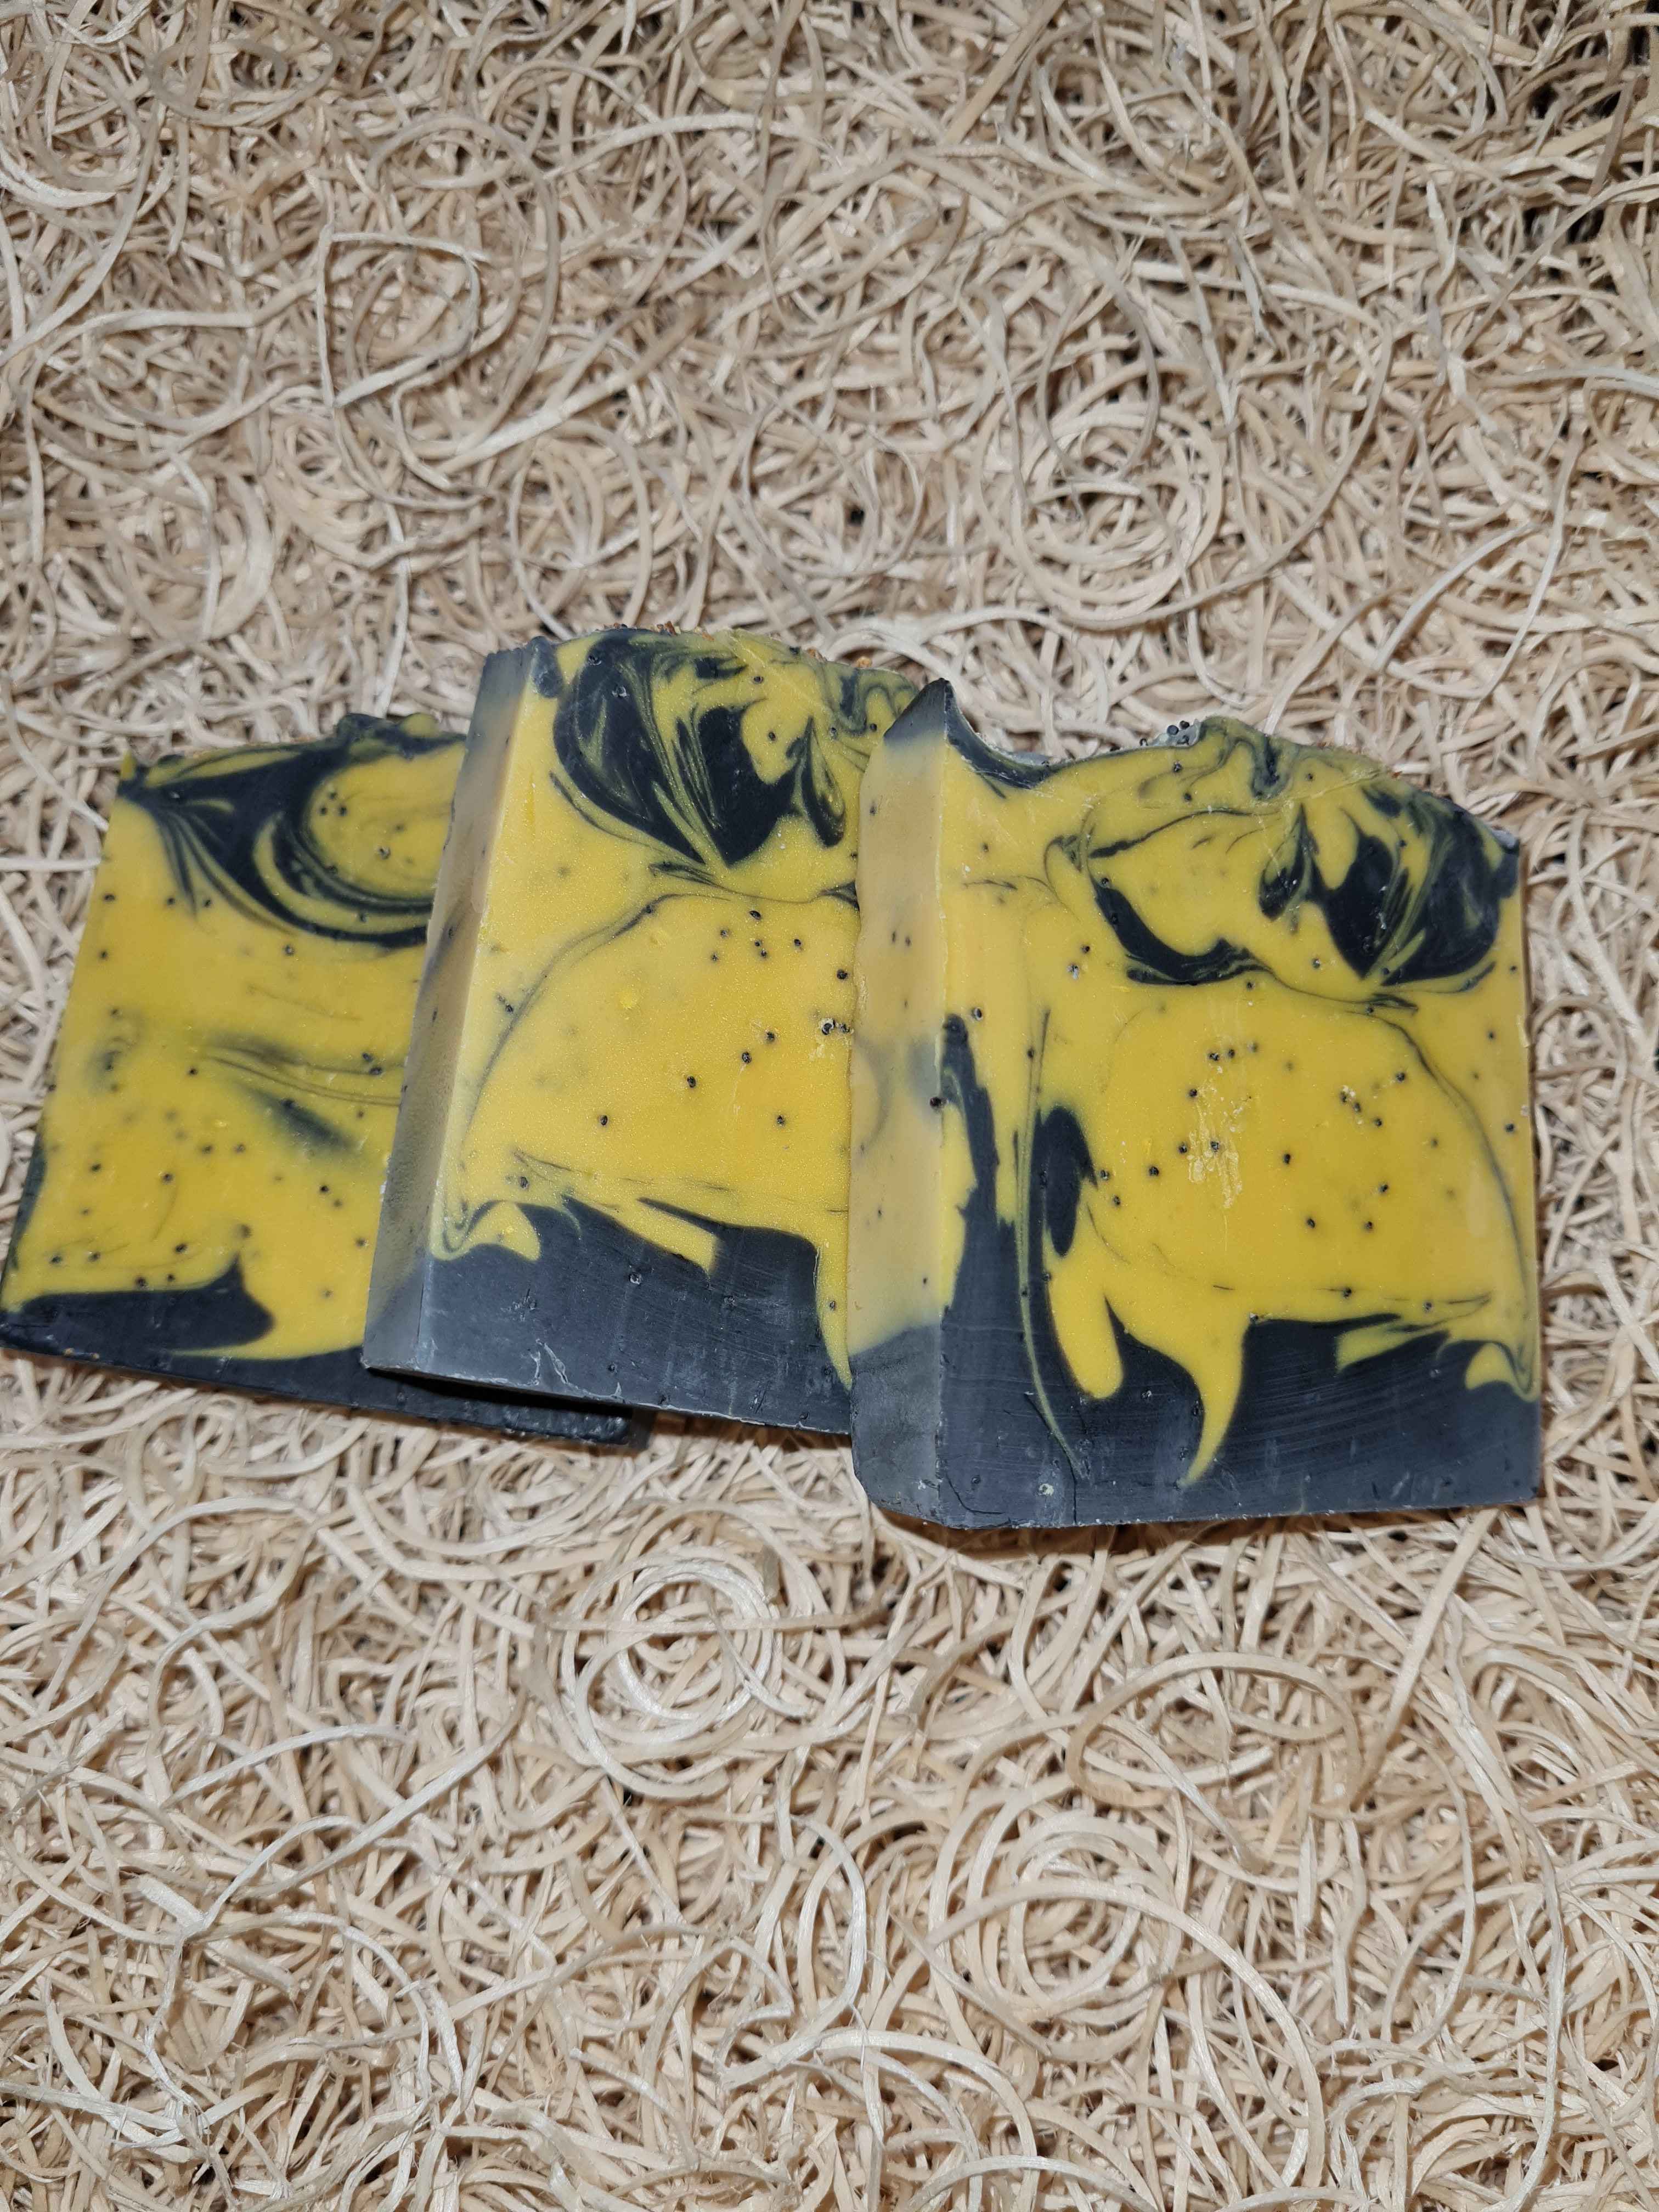 Goat's milk soap with Lemon essential oil, activated charcoal, Beeswax and poppy seeds 